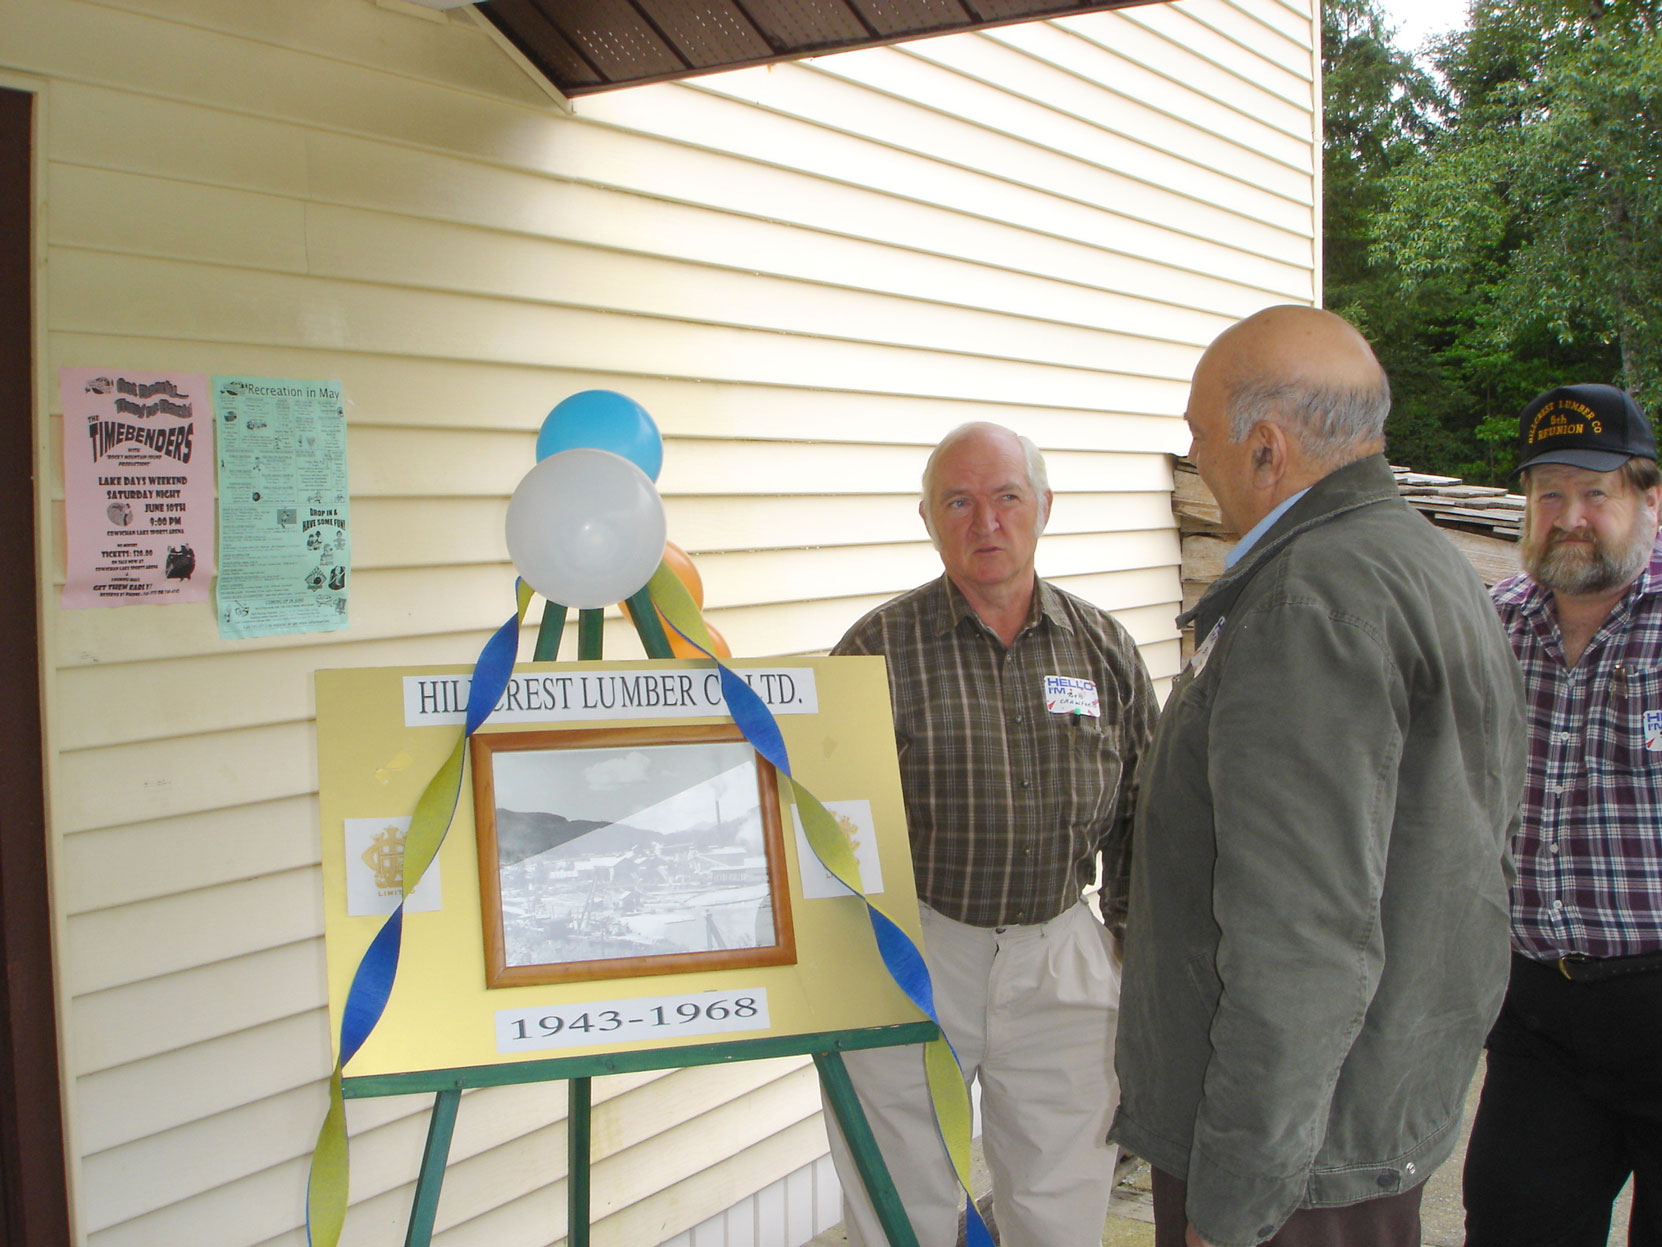 Bob Crawford (left) at the Hillcrest Lumber Co. Employees Reunion in 2006. (photo courtesy of Cecil Ashley)